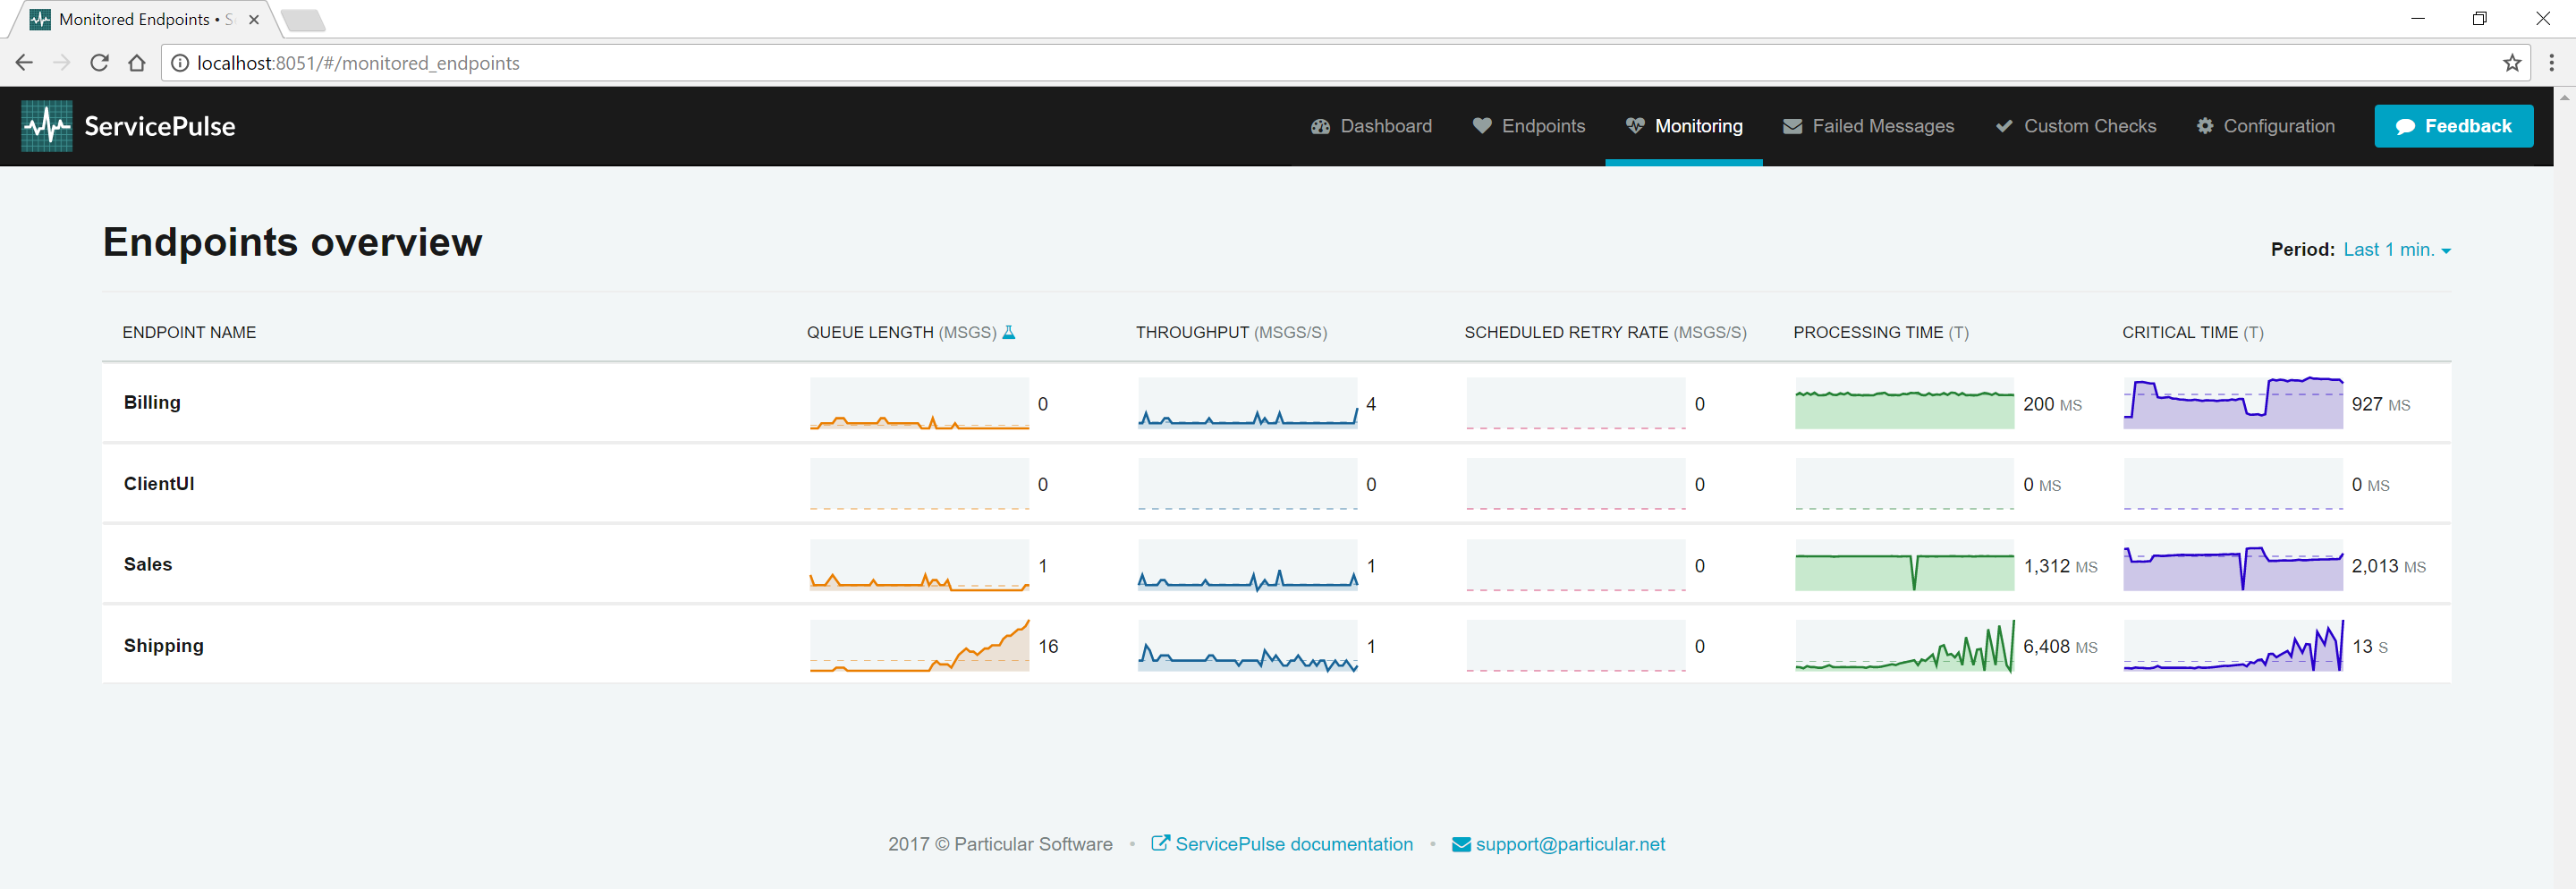 ServicePulse Monitoring tab showing resource degradation on Shipping endpoint